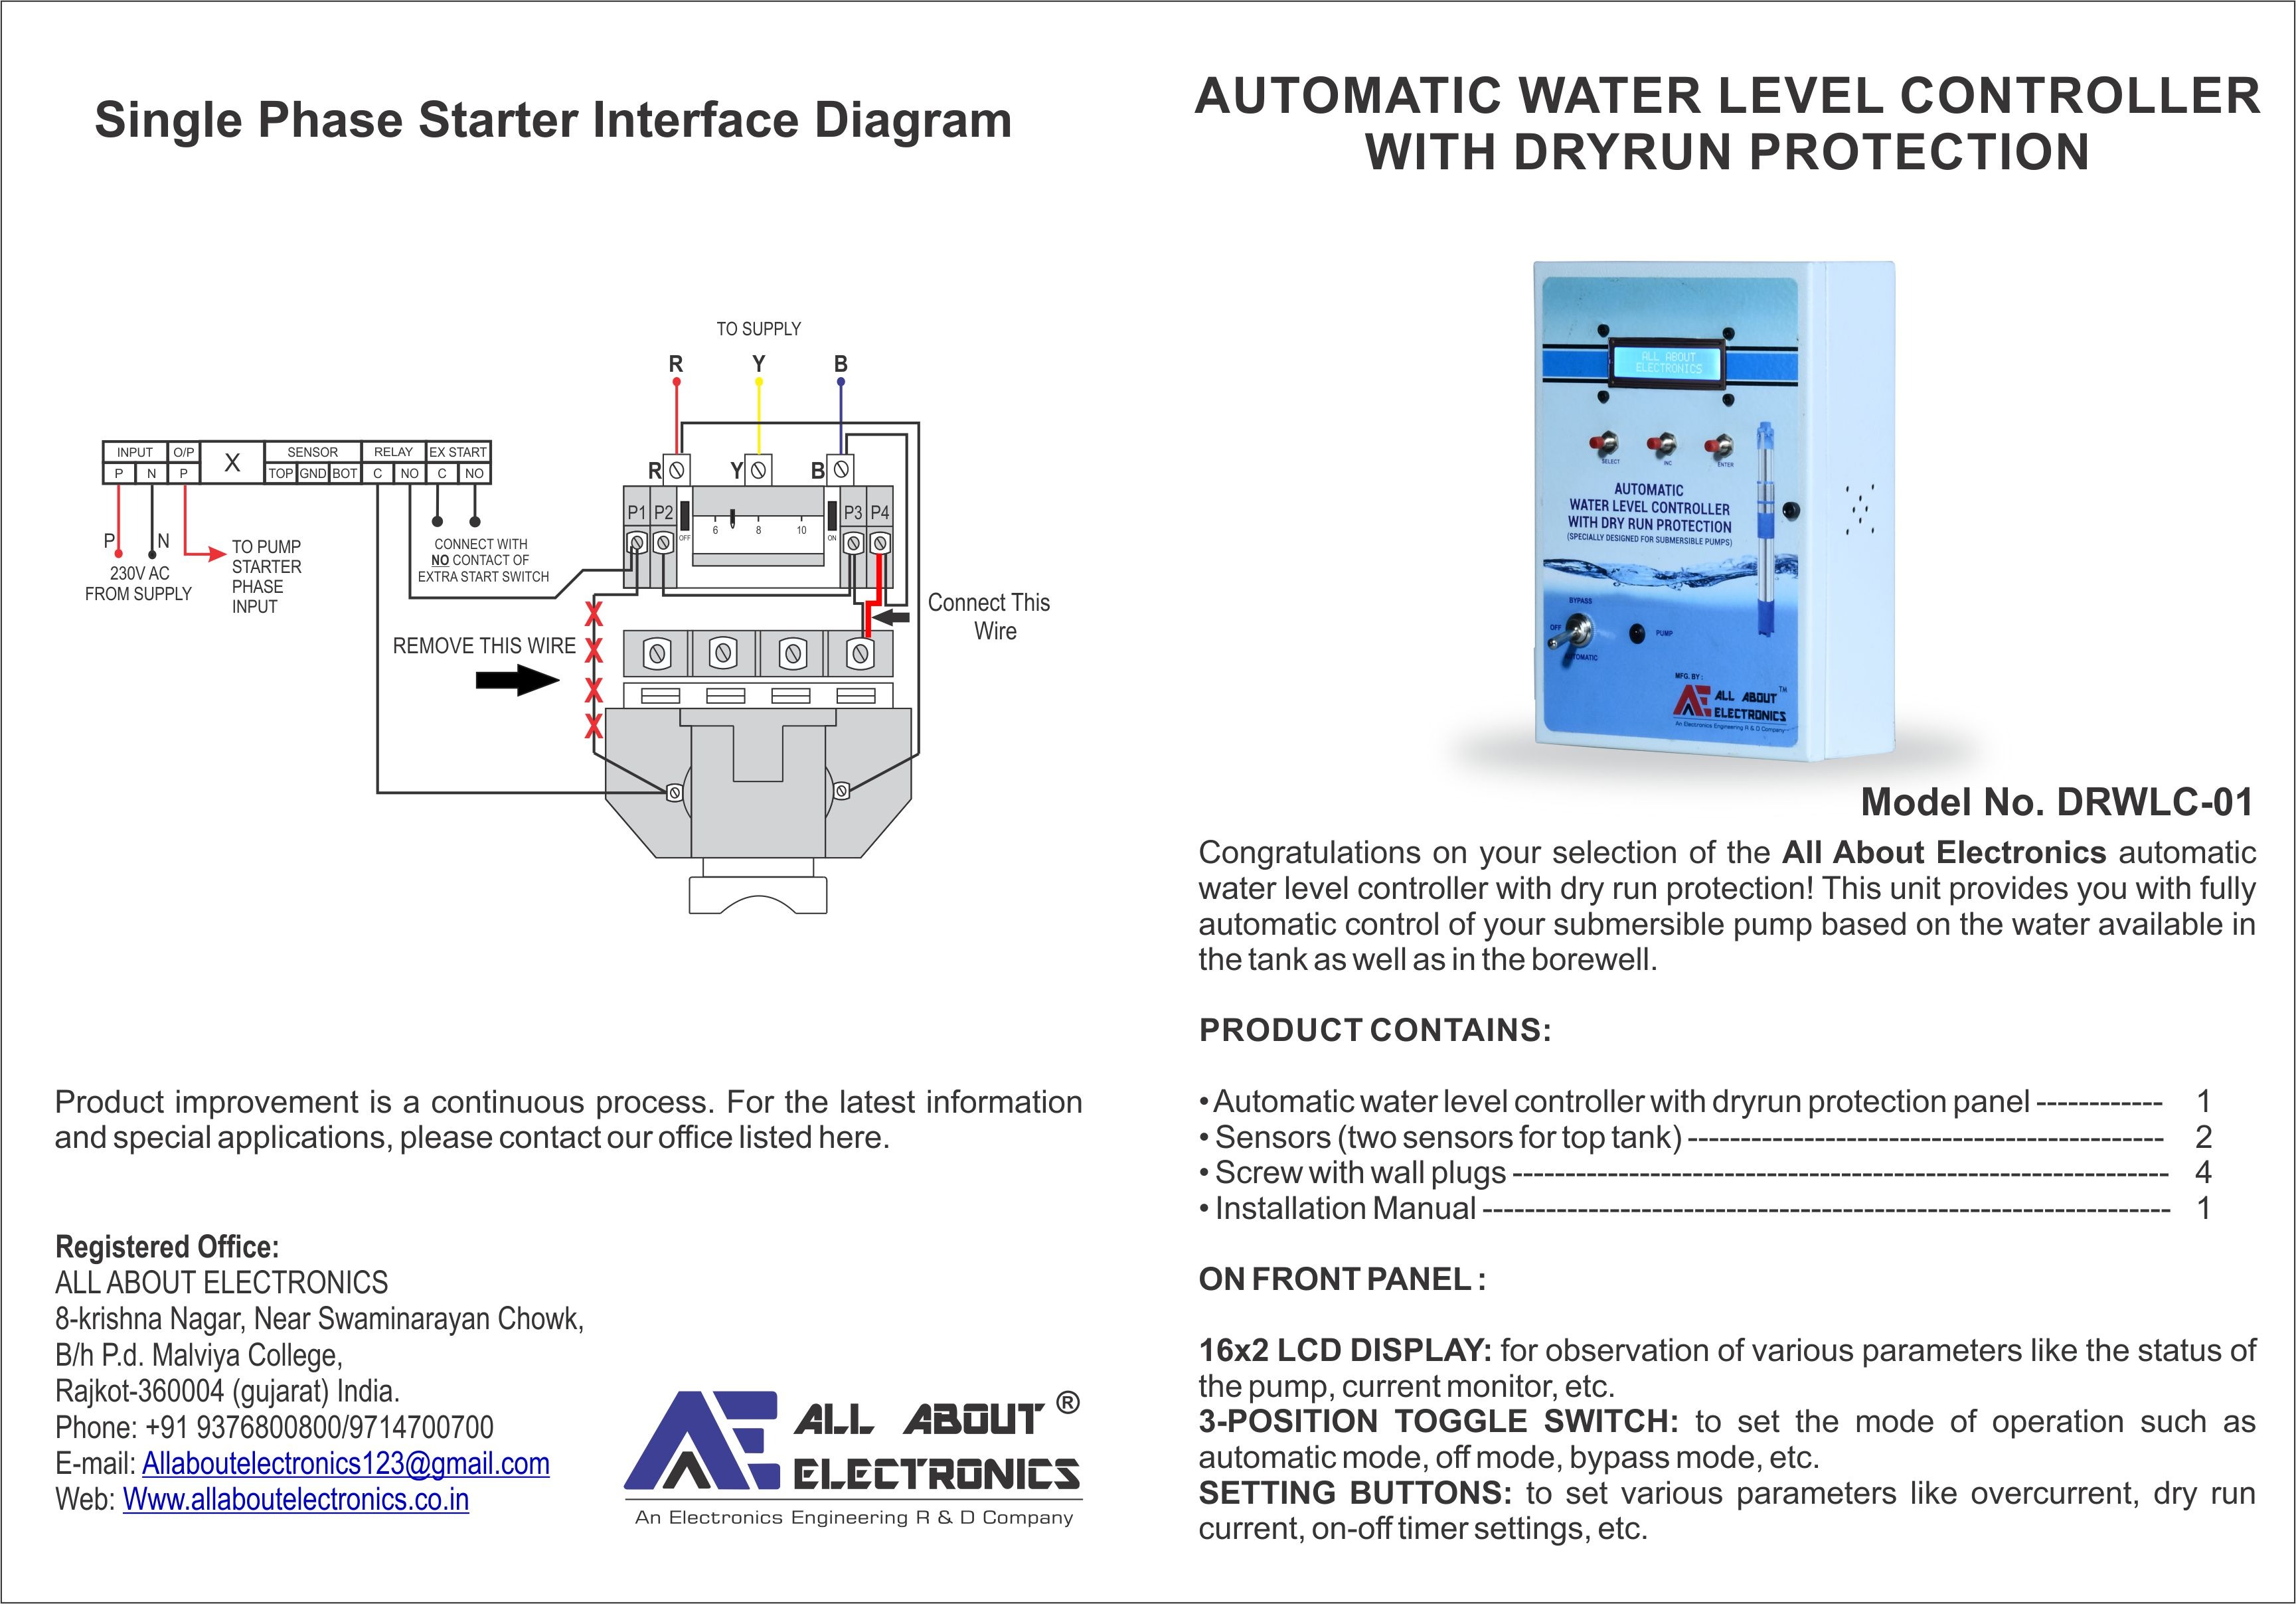 DRWLC-01 1-Phase Automatic Water Level Controller With Dry Run Protection